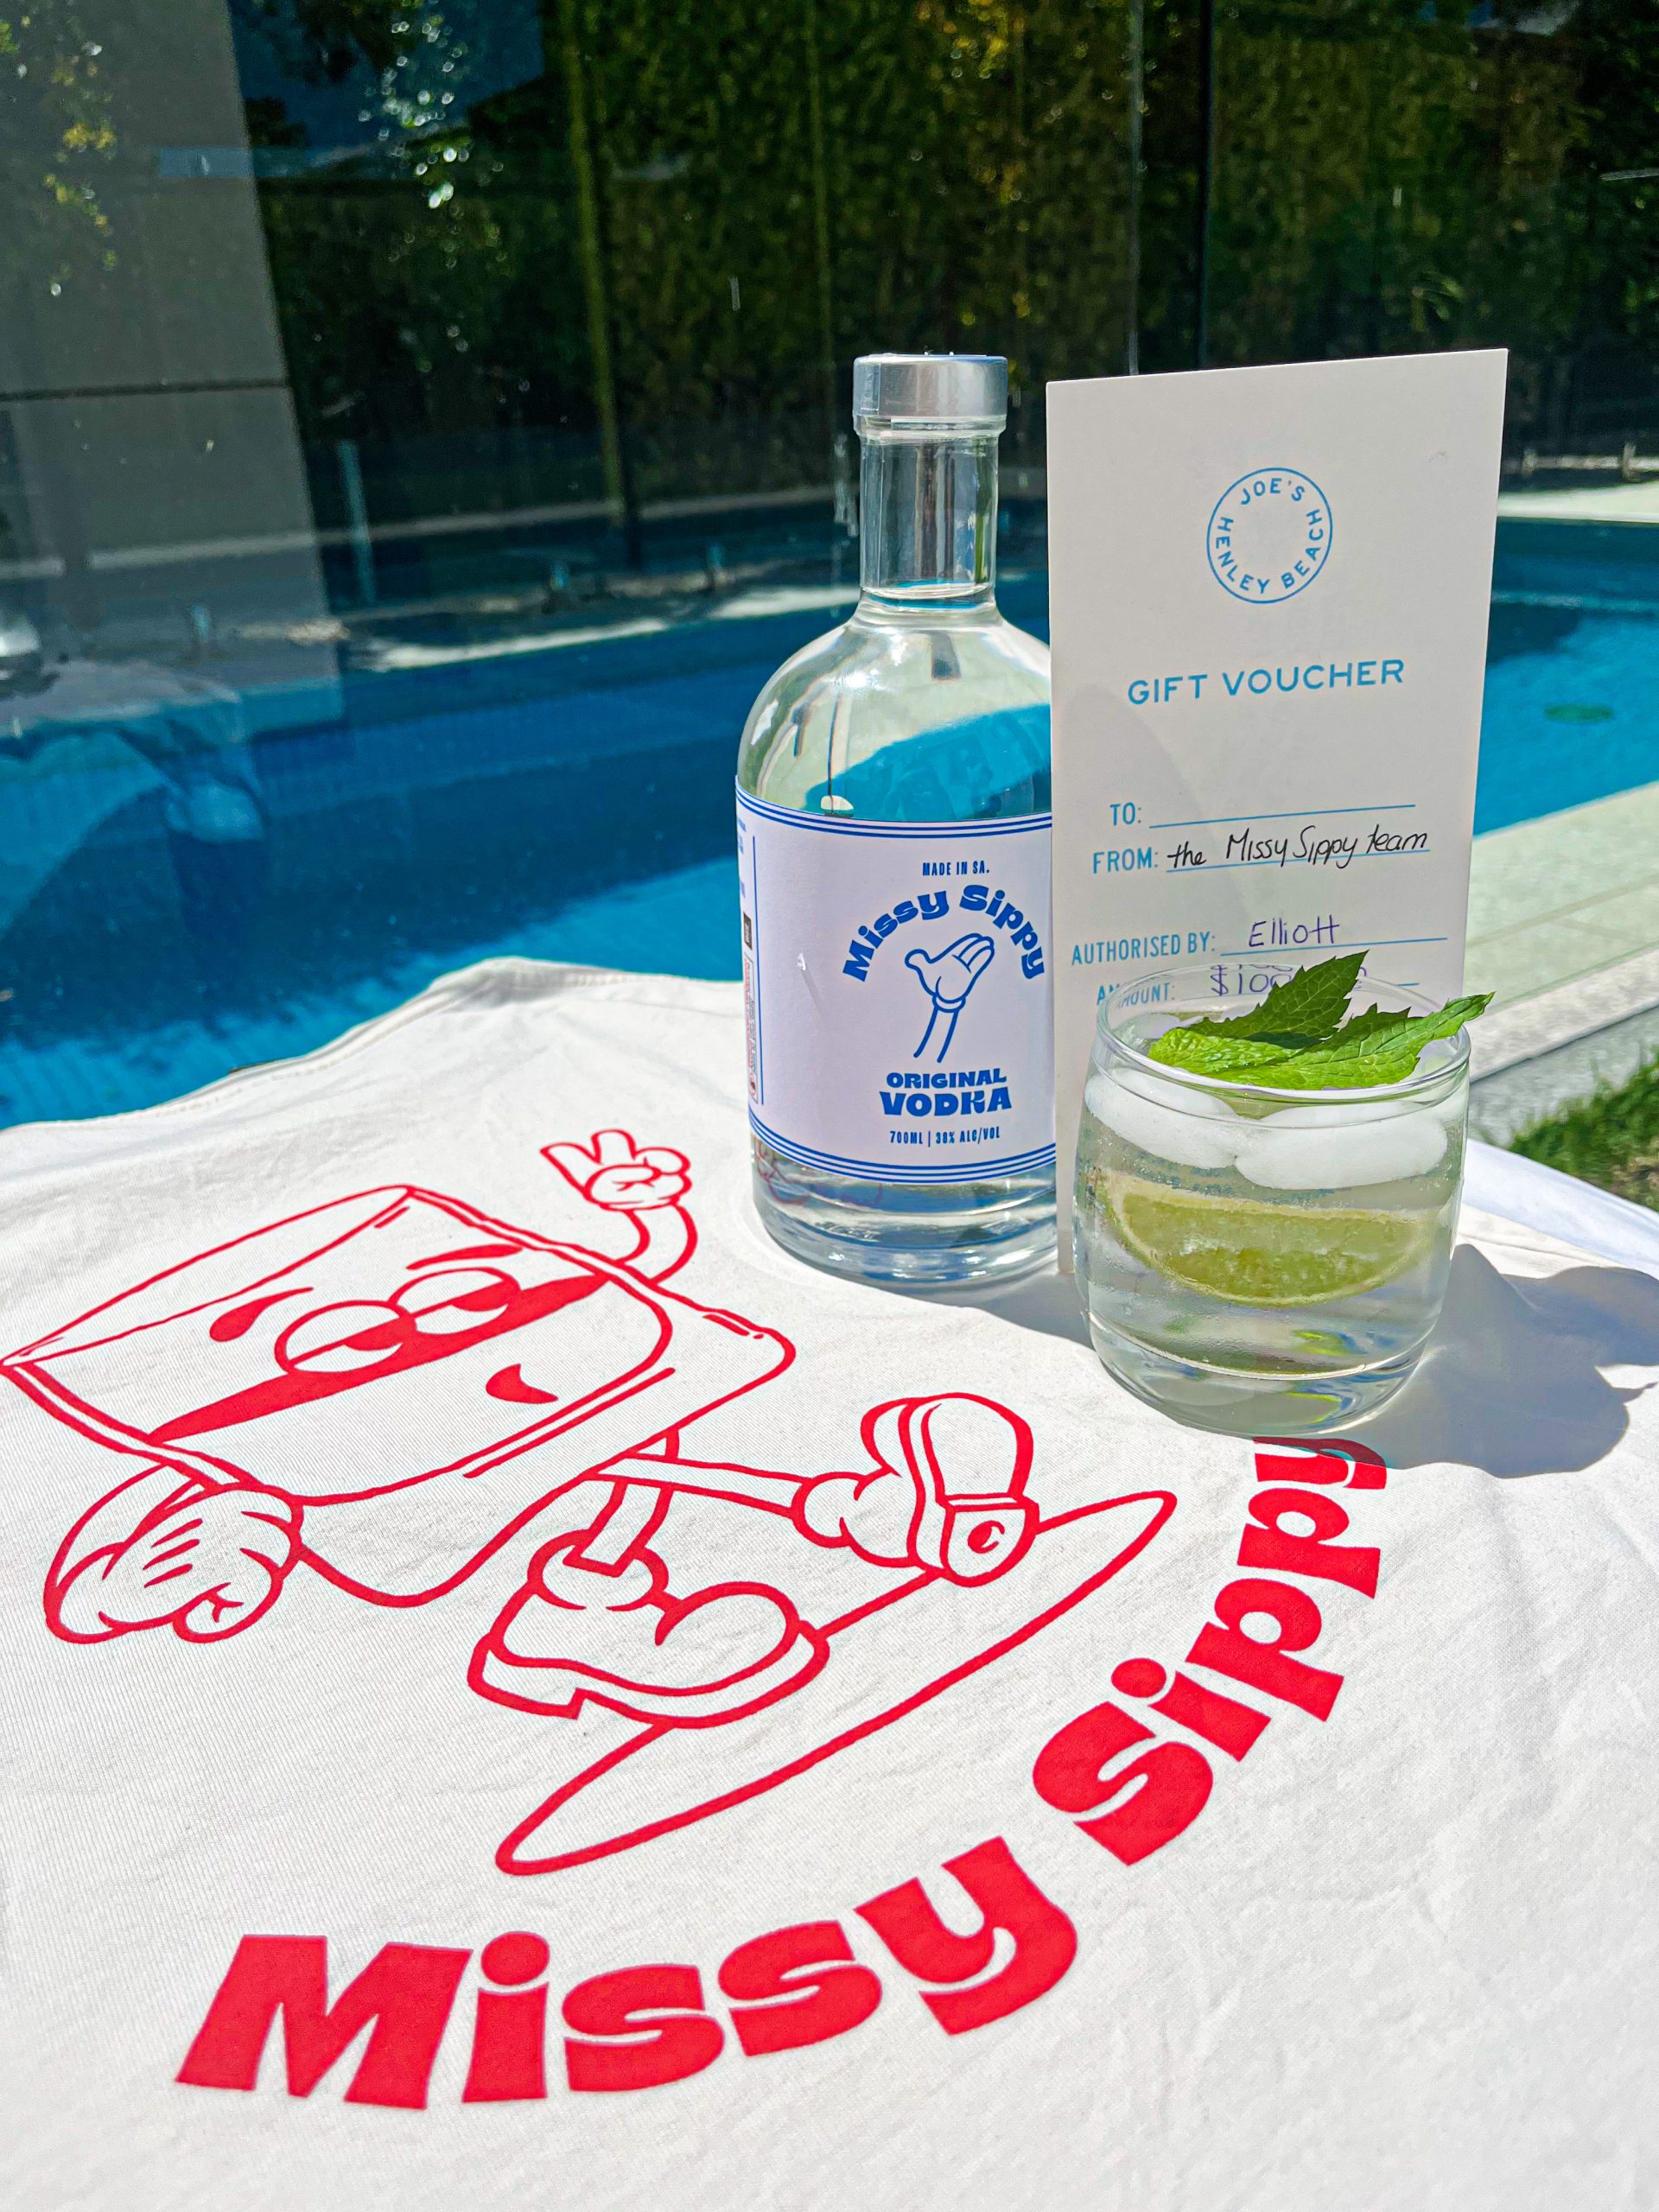 WIN the ultimate Missy Sippy Prize Pack plus a $100 Joe’s Henley Voucher!